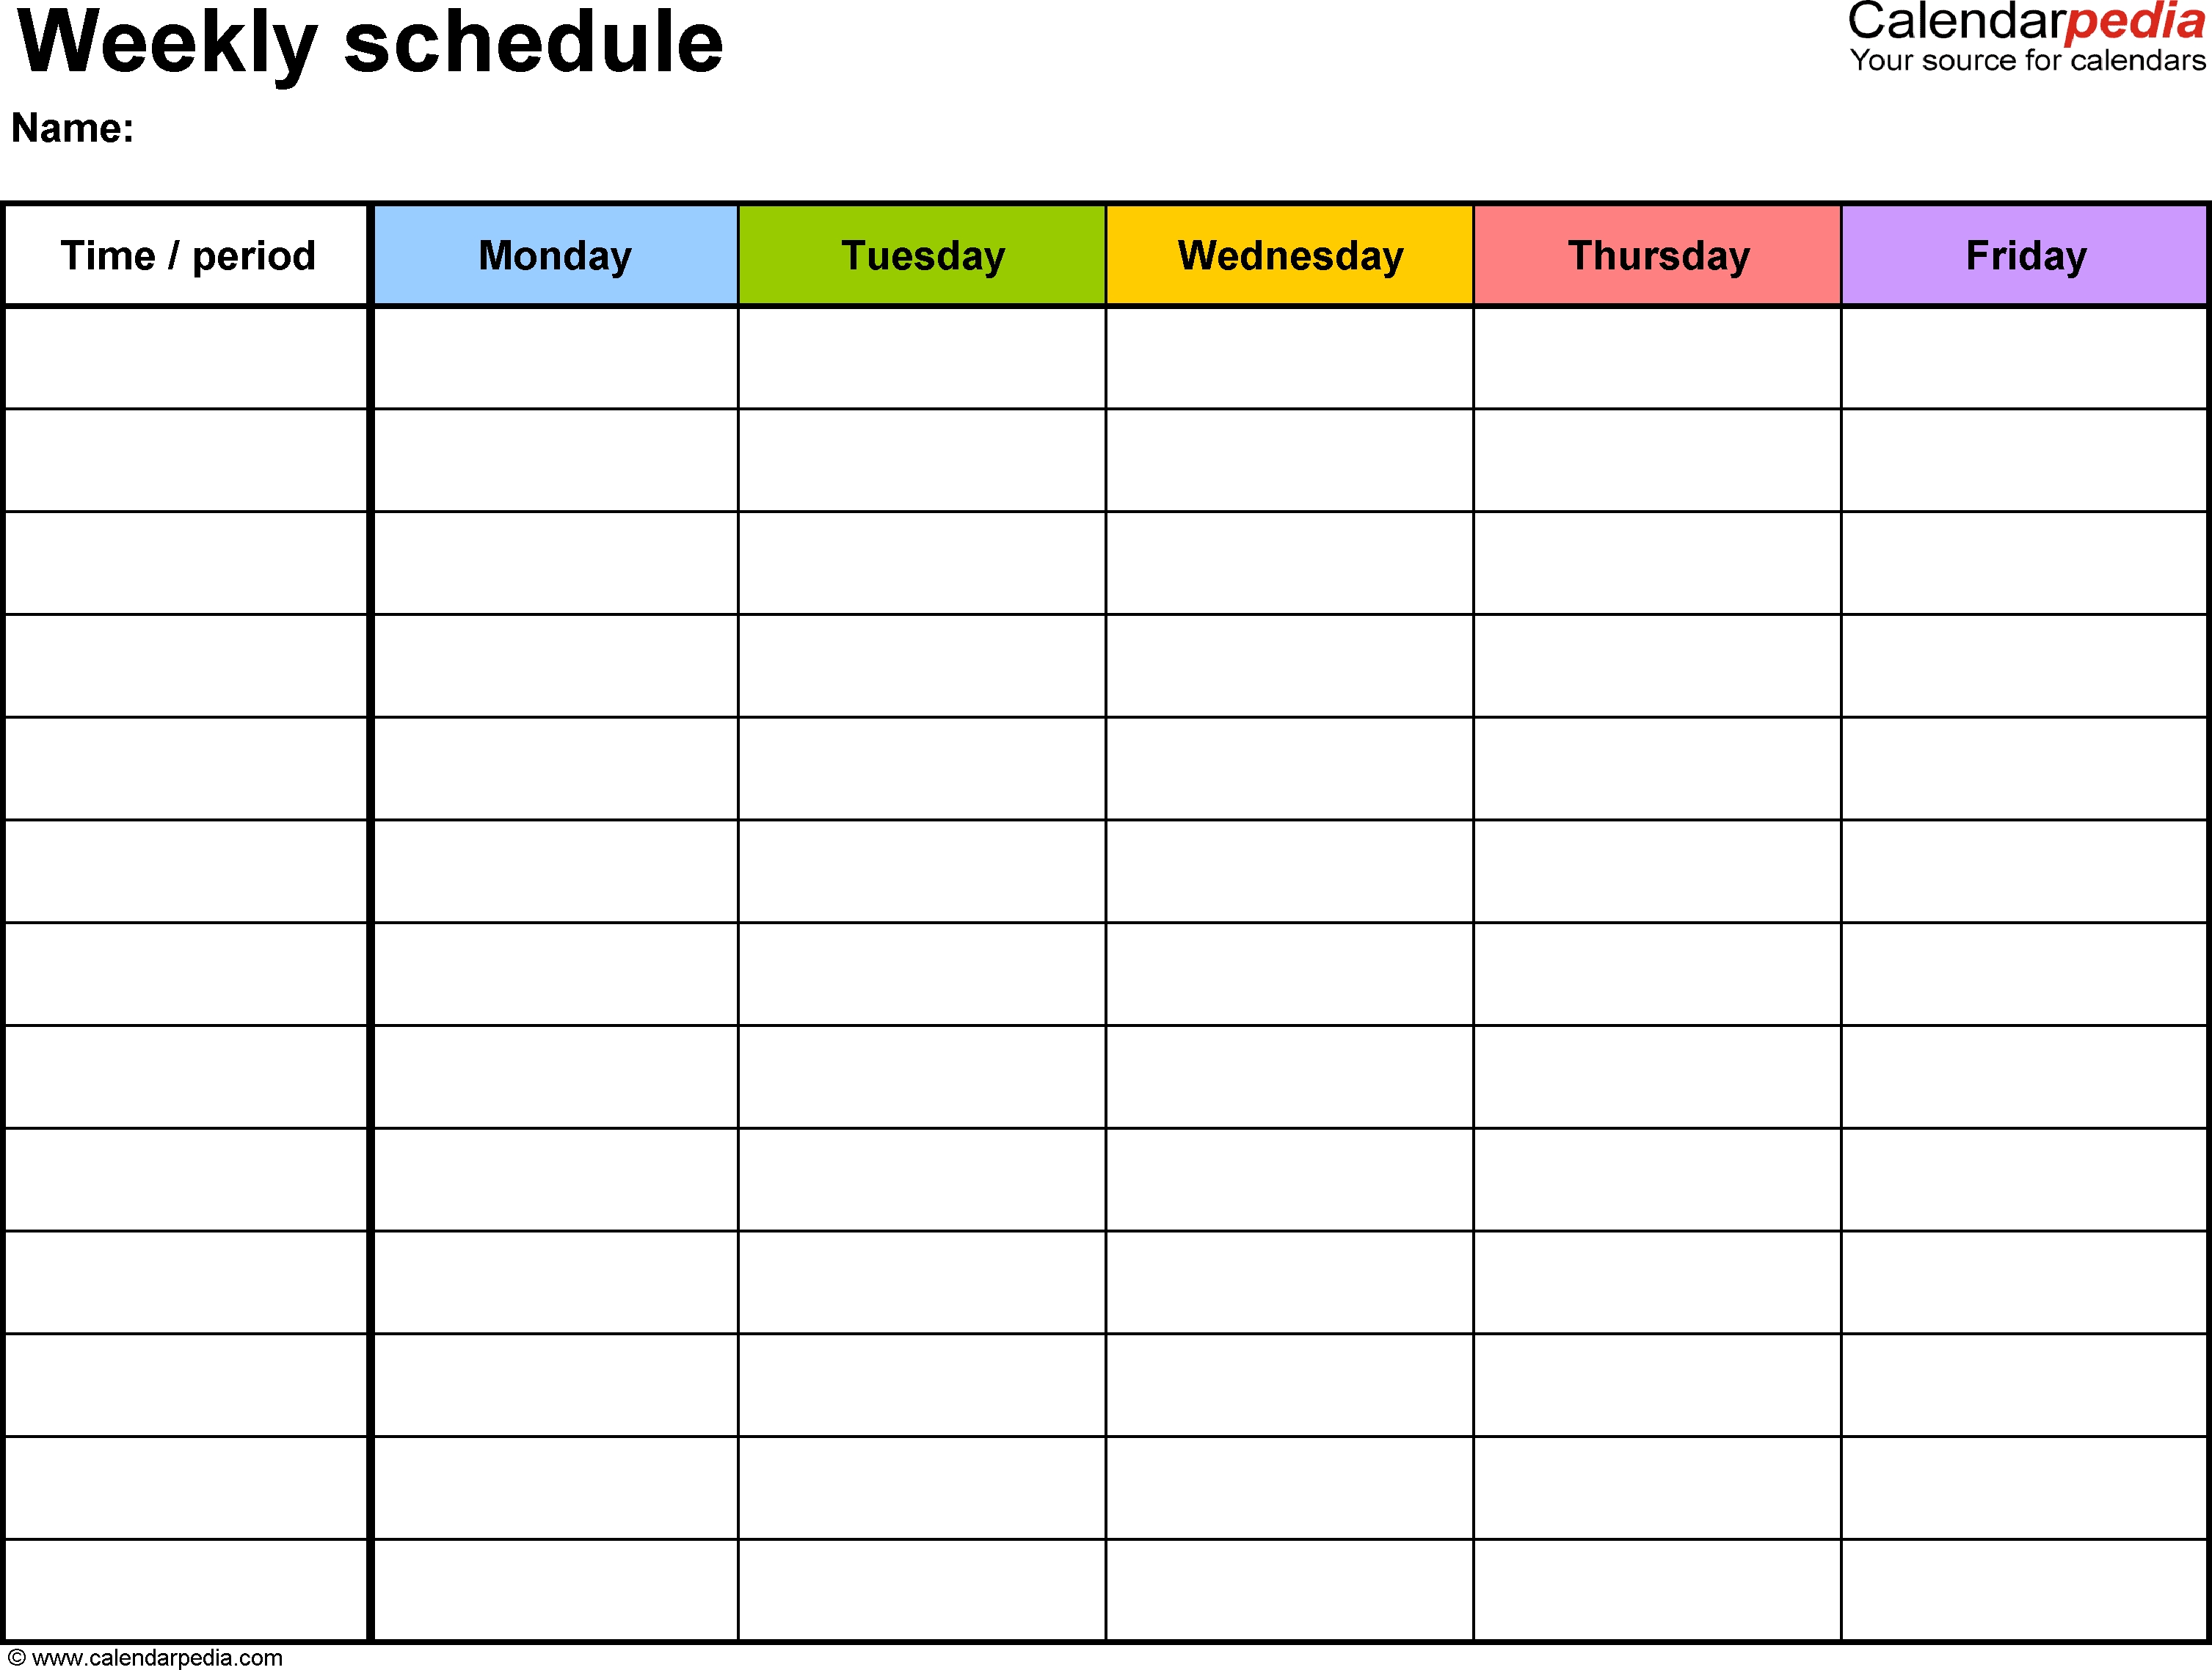 Free Weekly Schedule Templates For Excel - 18 Templates with Appointment Schedule Template Sunday To Saturday